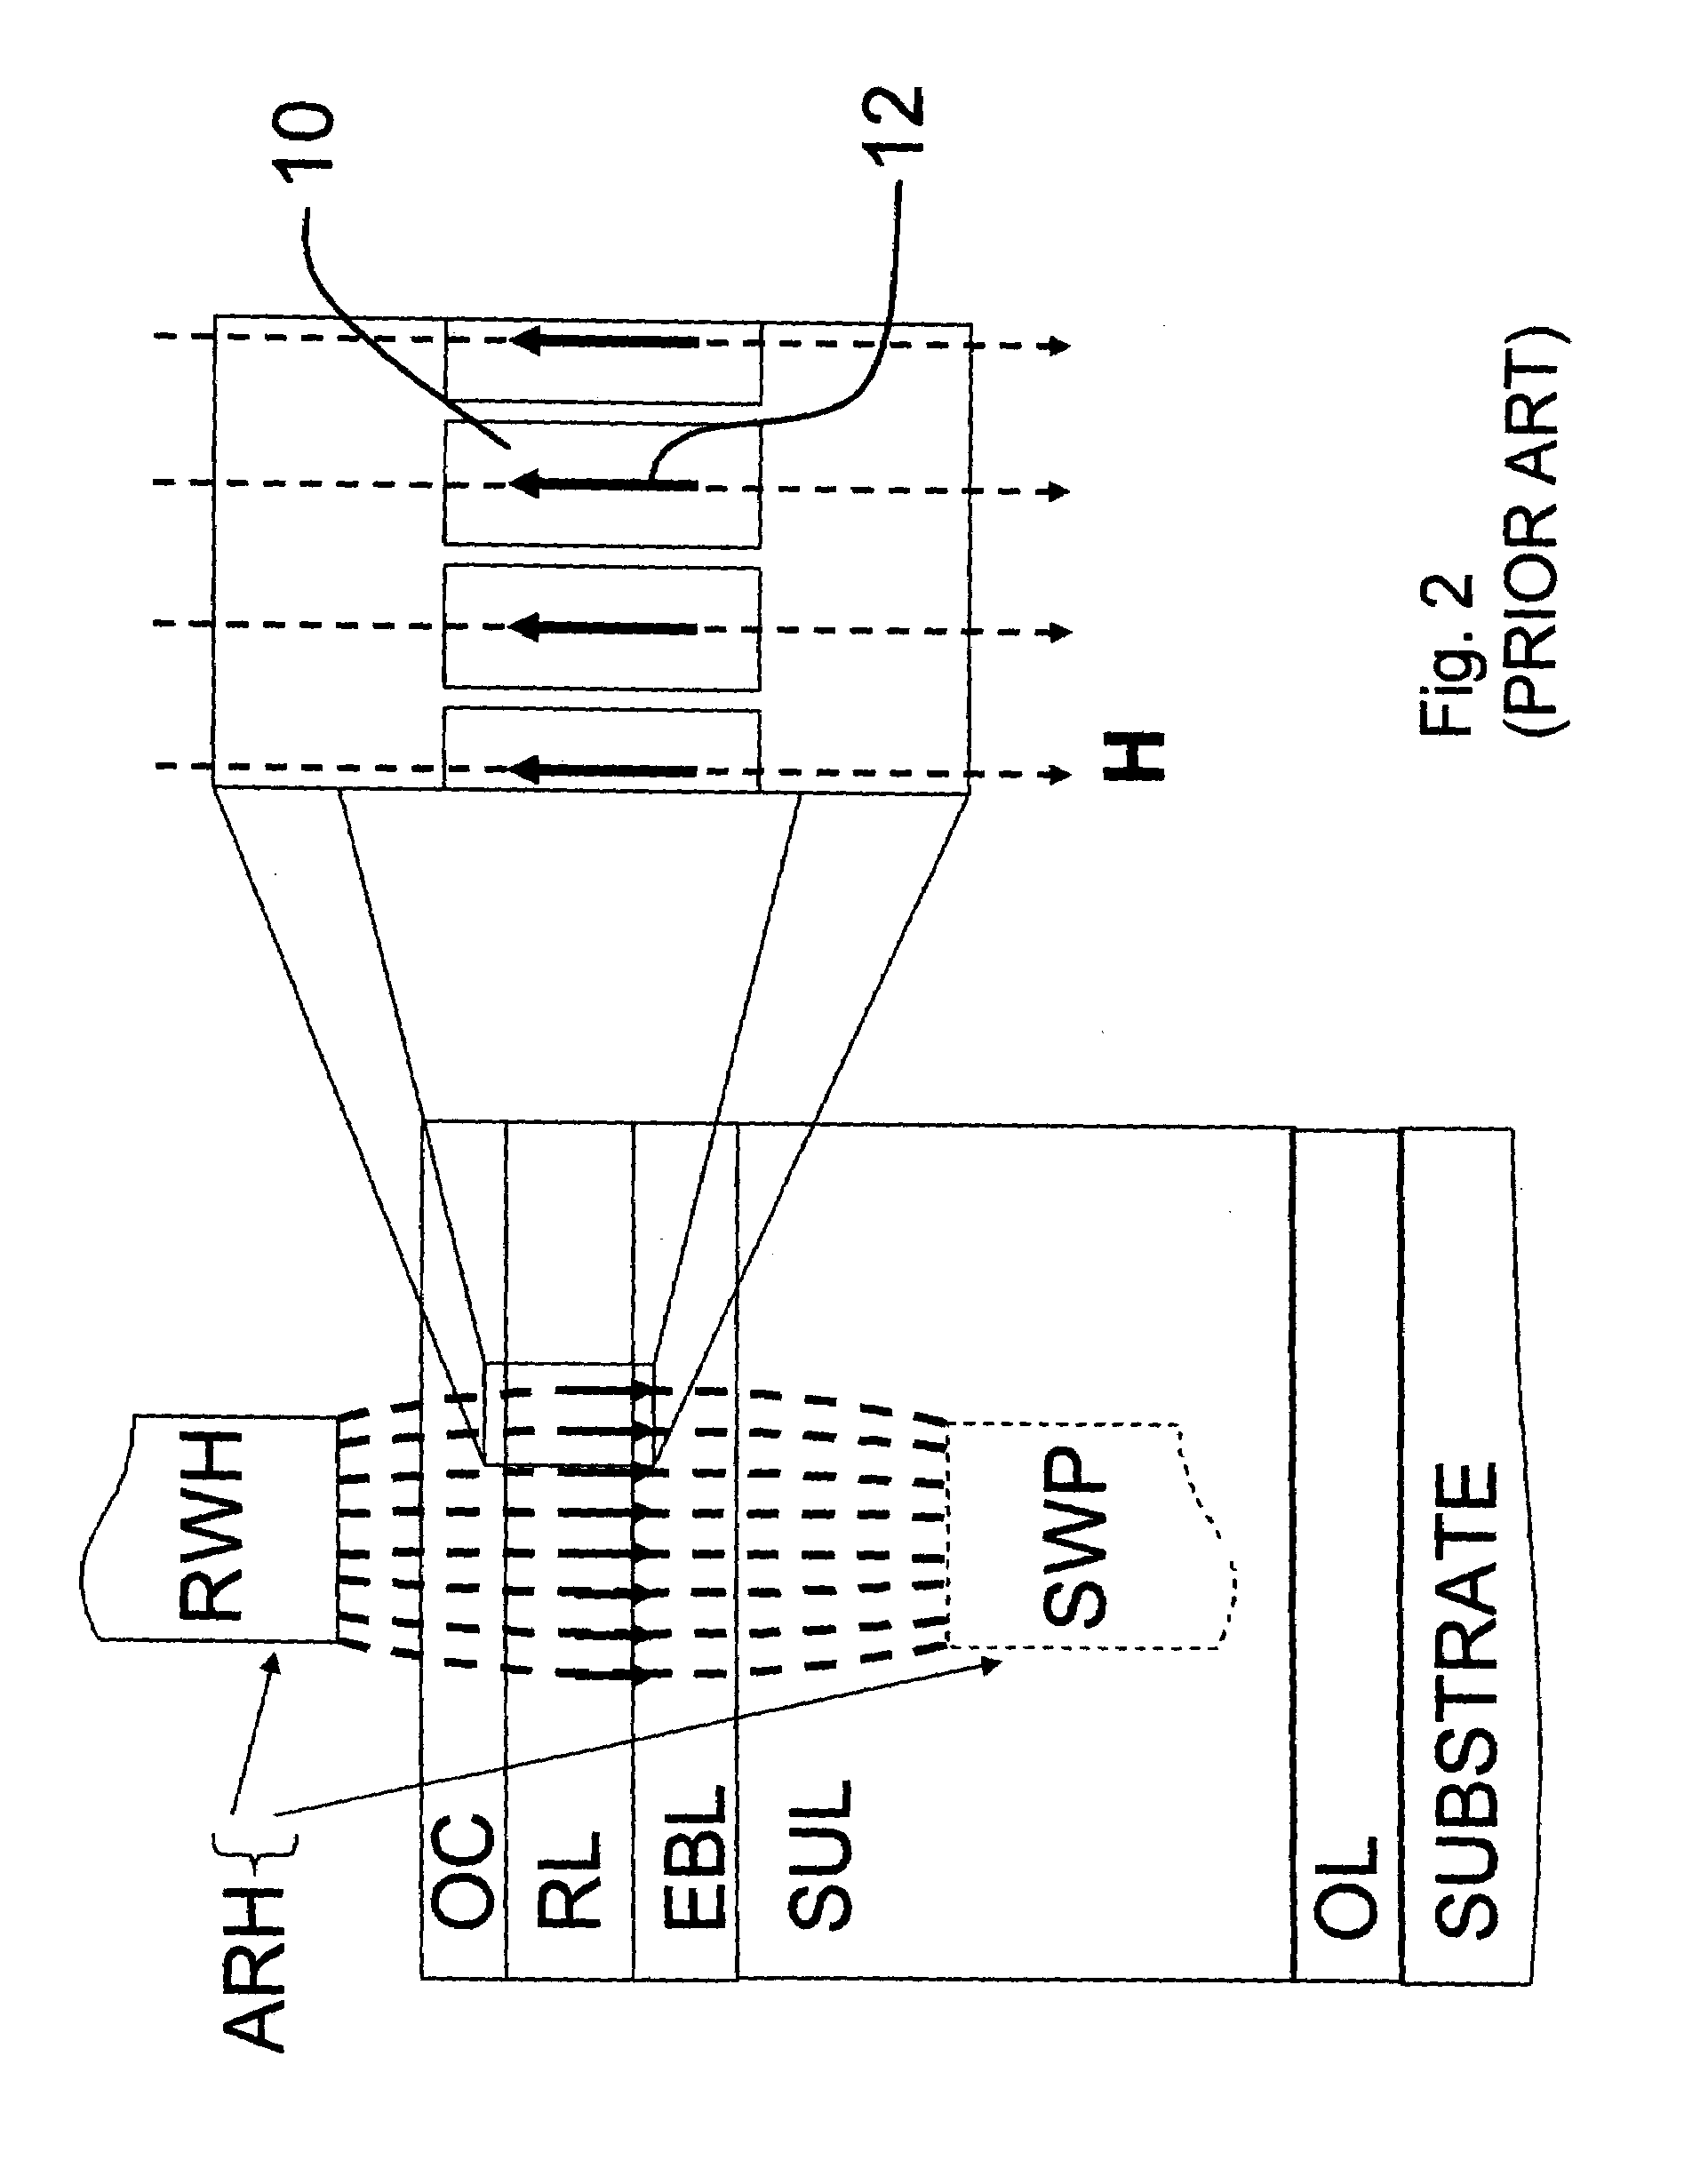 Perpendicular magnetic recording medium with magnetic torque layer coupled to the perpendicular recording layer